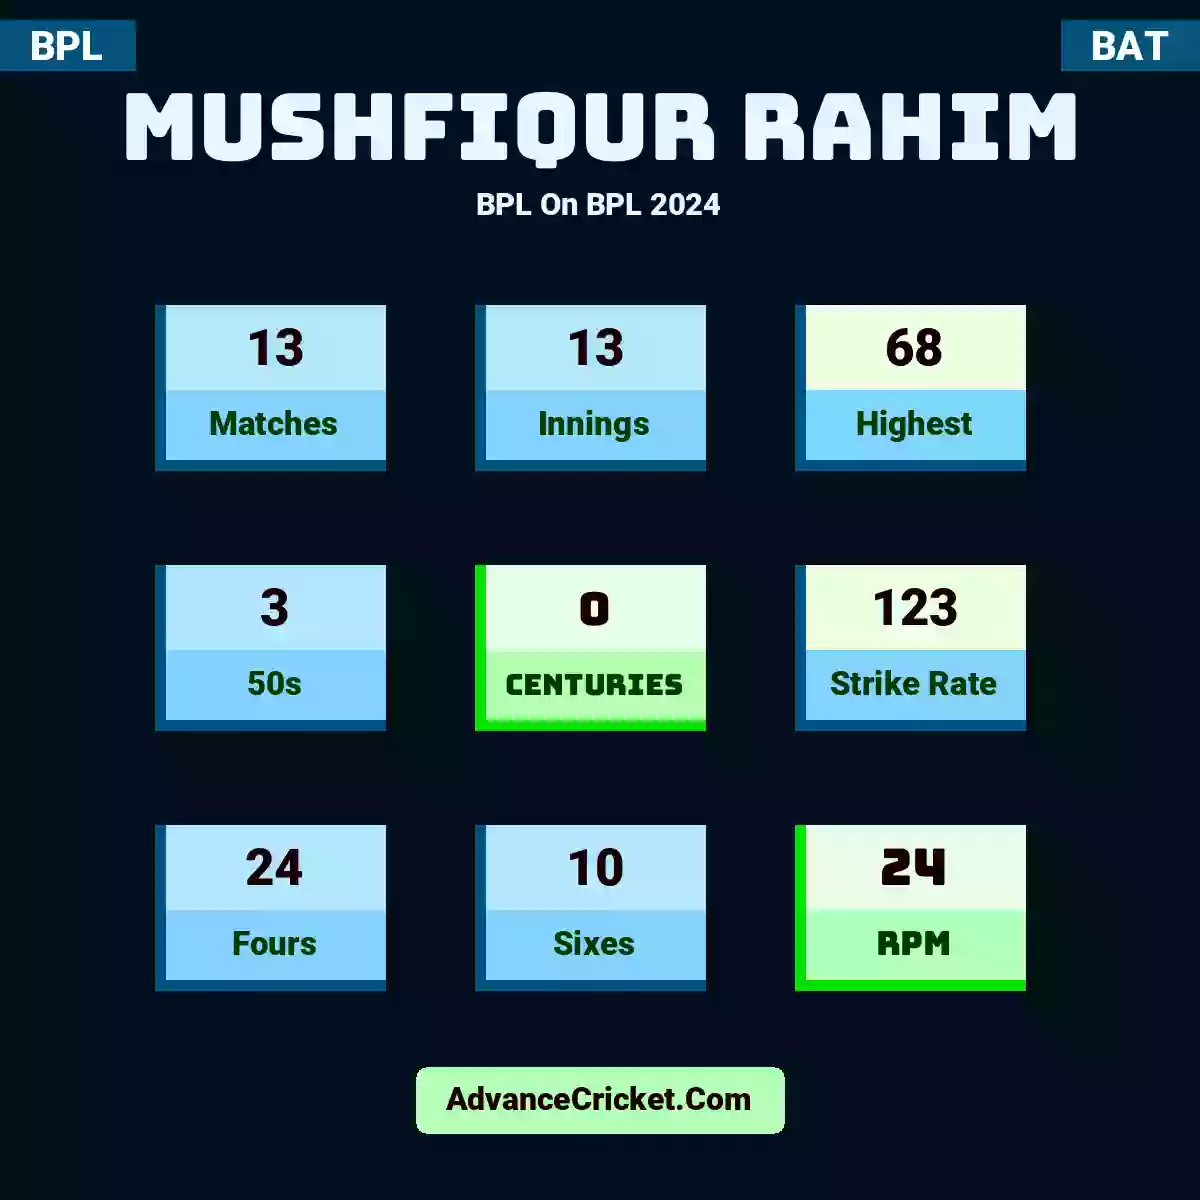 Mushfiqur Rahim BPL  On BPL 2024, Mushfiqur Rahim played 13 matches, scored 68 runs as highest, 3 half-centuries, and 0 centuries, with a strike rate of 123. M.Rahim hit 24 fours and 10 sixes, with an RPM of 24.